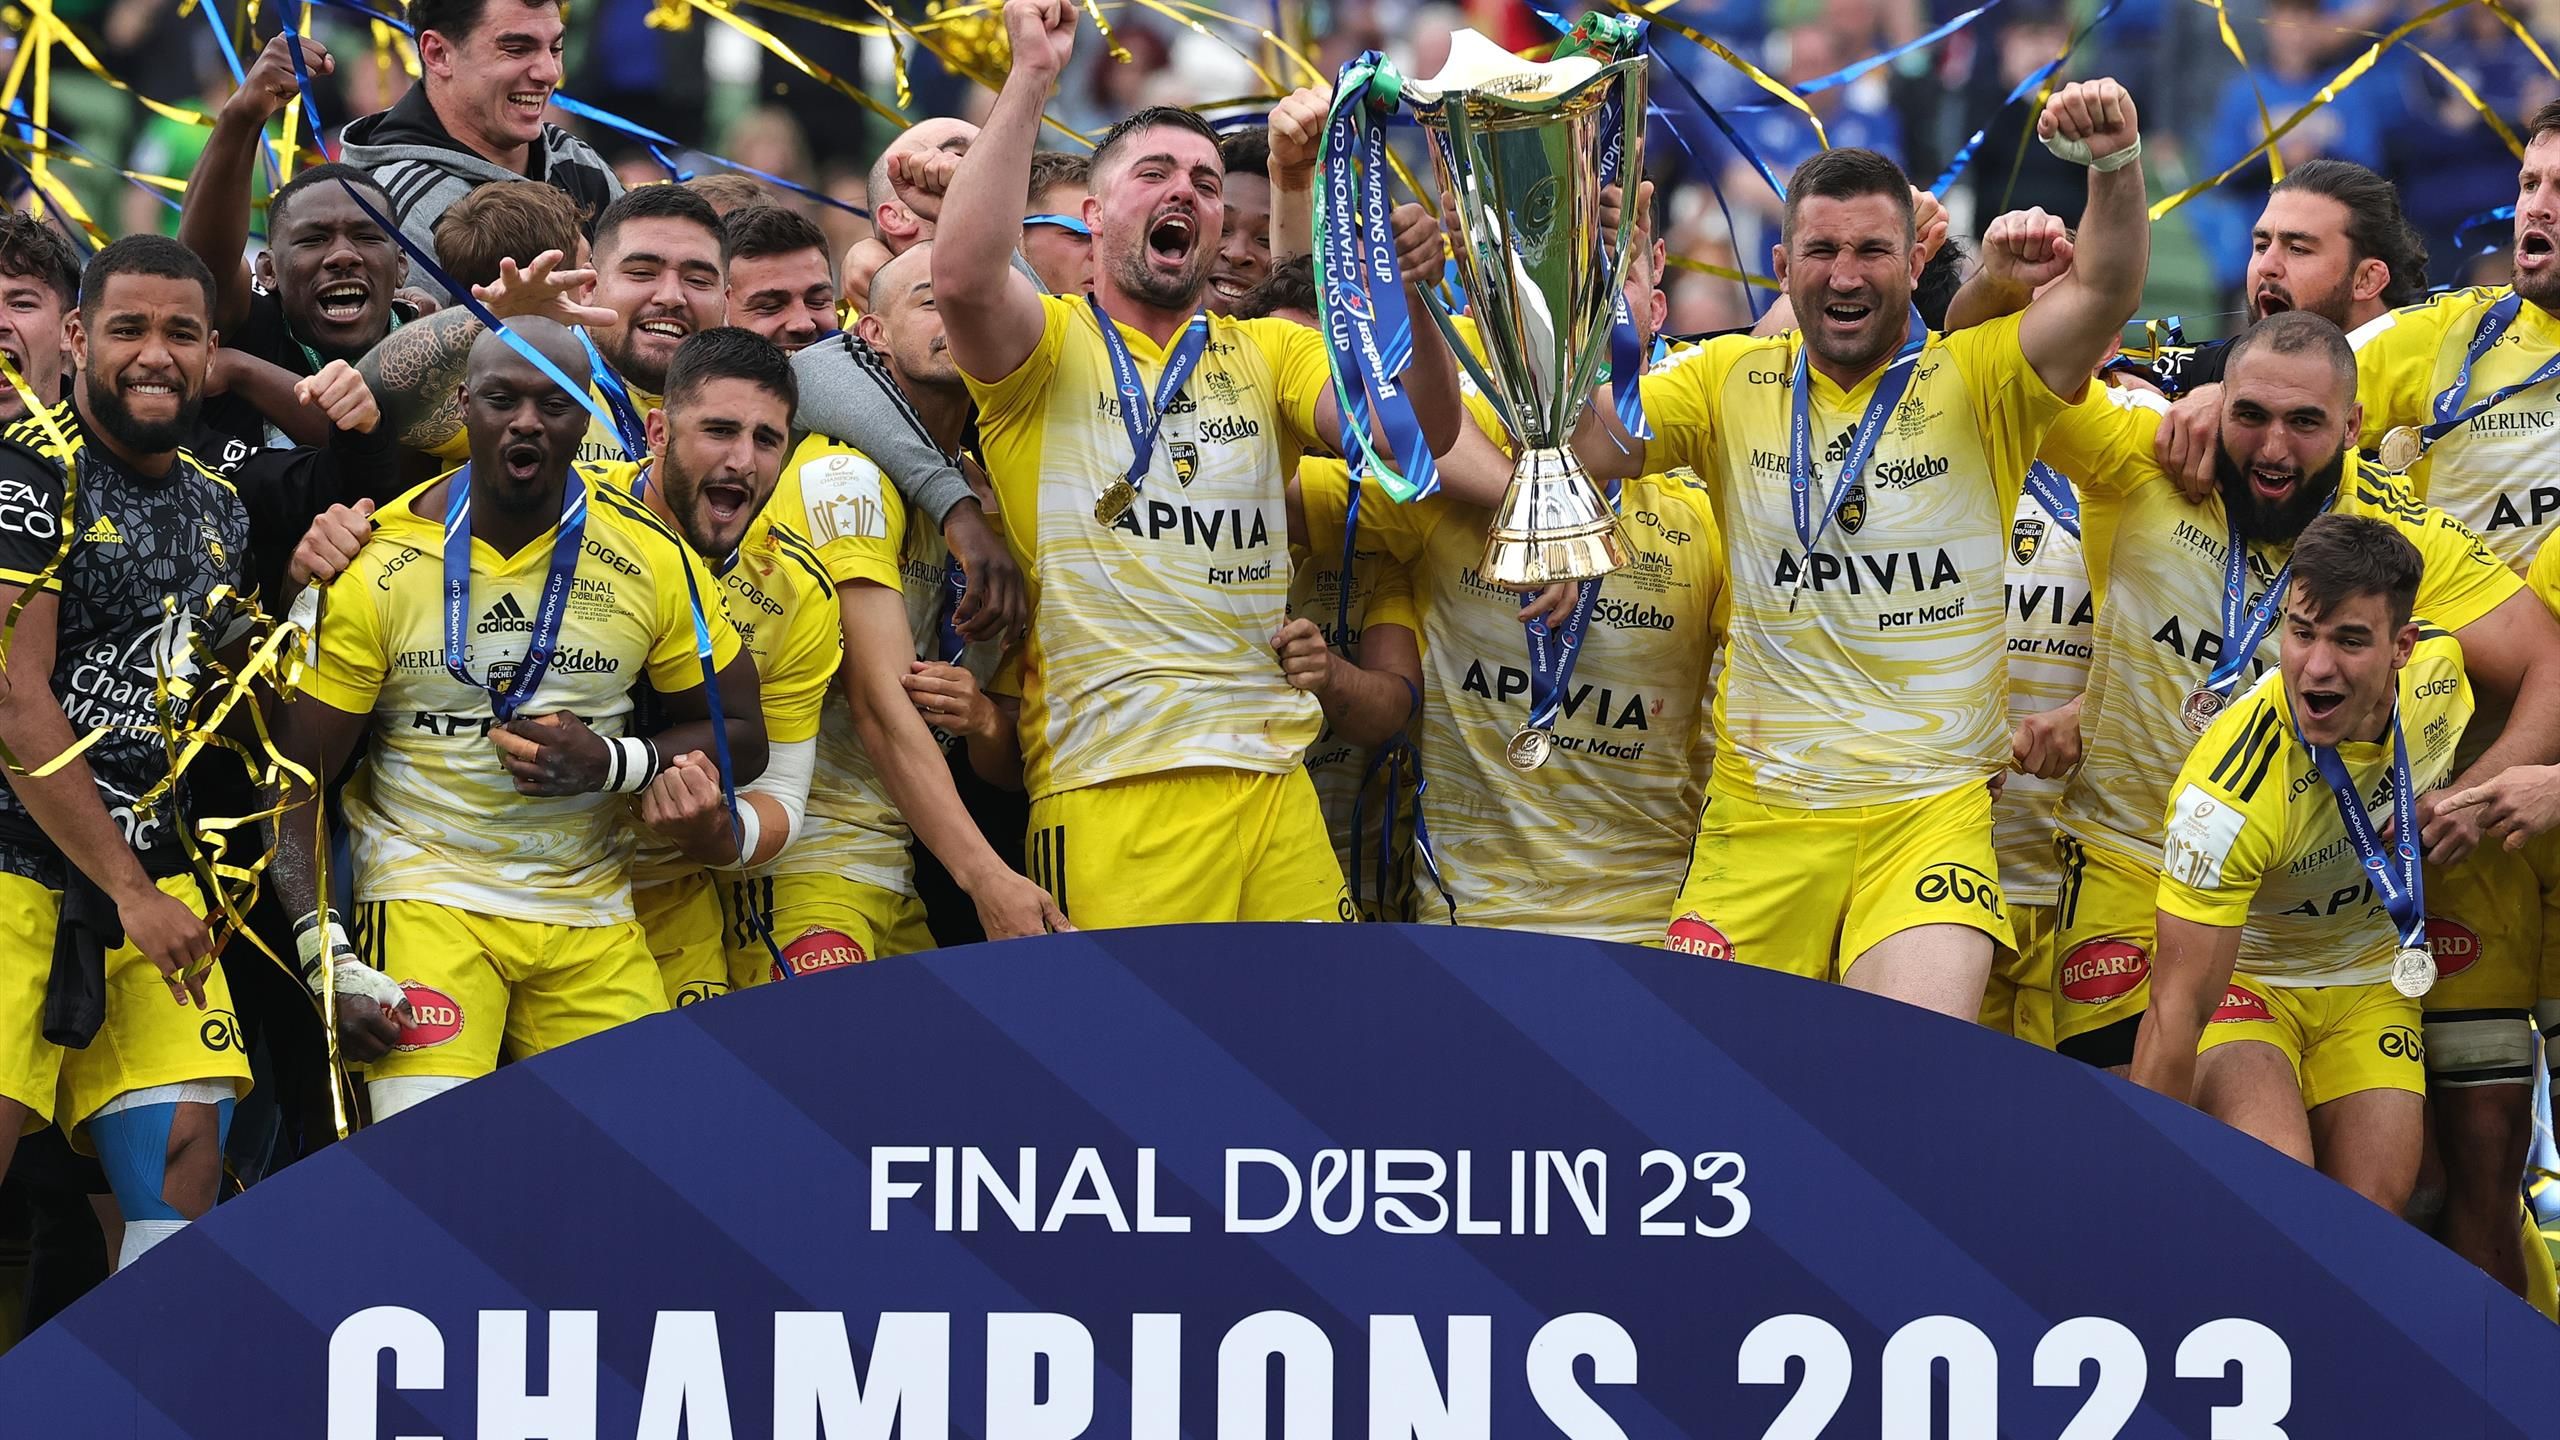 La Rochelle pull off historic comeback win in 27-26 Champions Cup final victory over Leinster